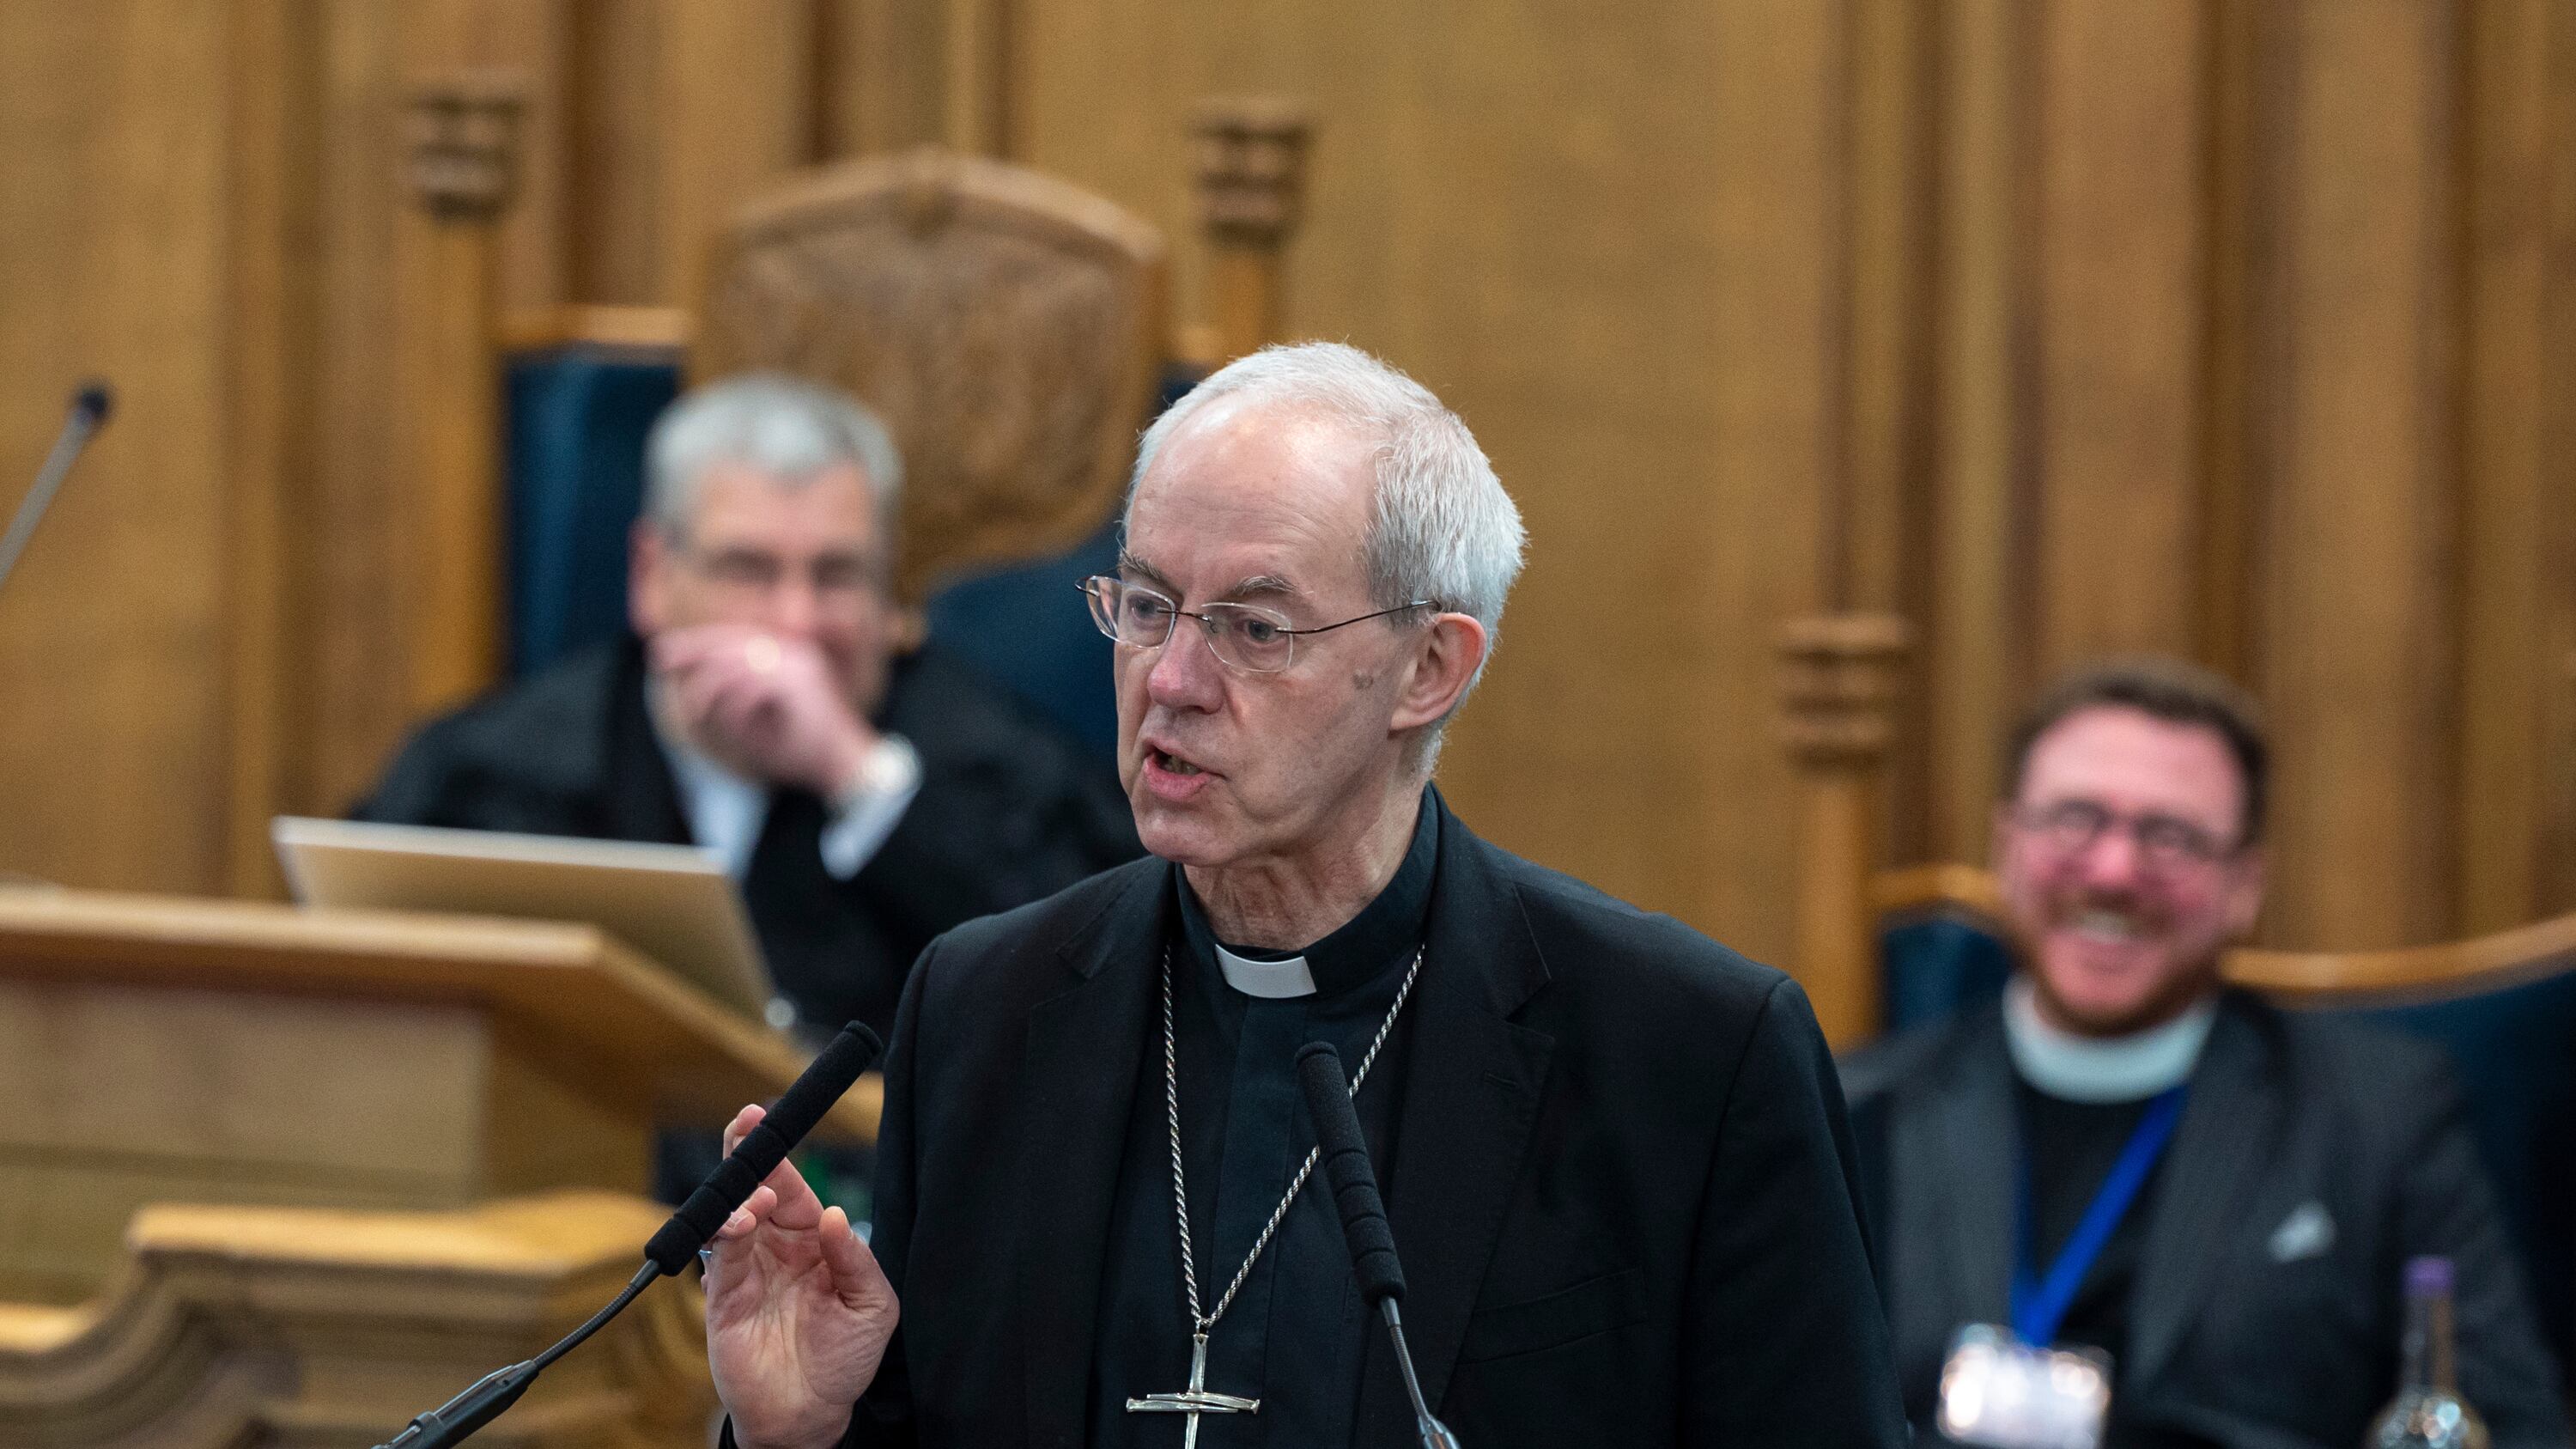 The Archbishop of Canterbury has addressed the General Assembly of the Church of Scotland